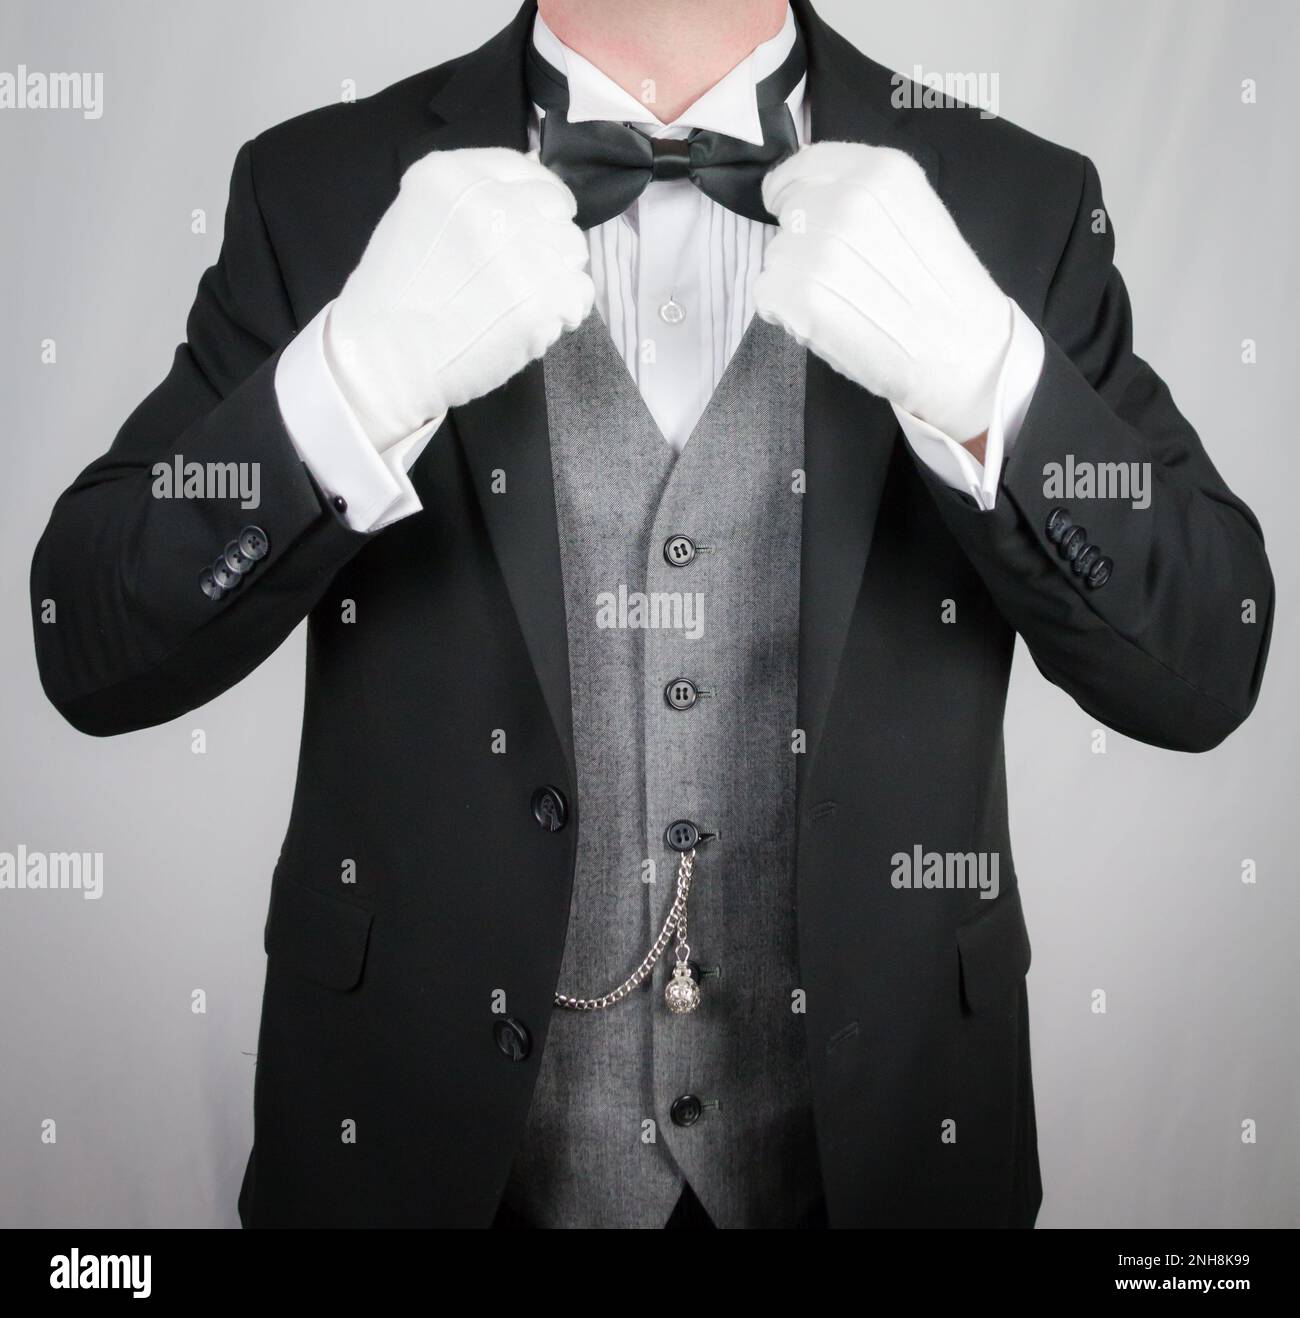 Portrait of Butler in Dark Formal Suit and White Gloves Straightening Bow Tie. Service Industry and Professional Hospitality. Stock Photo